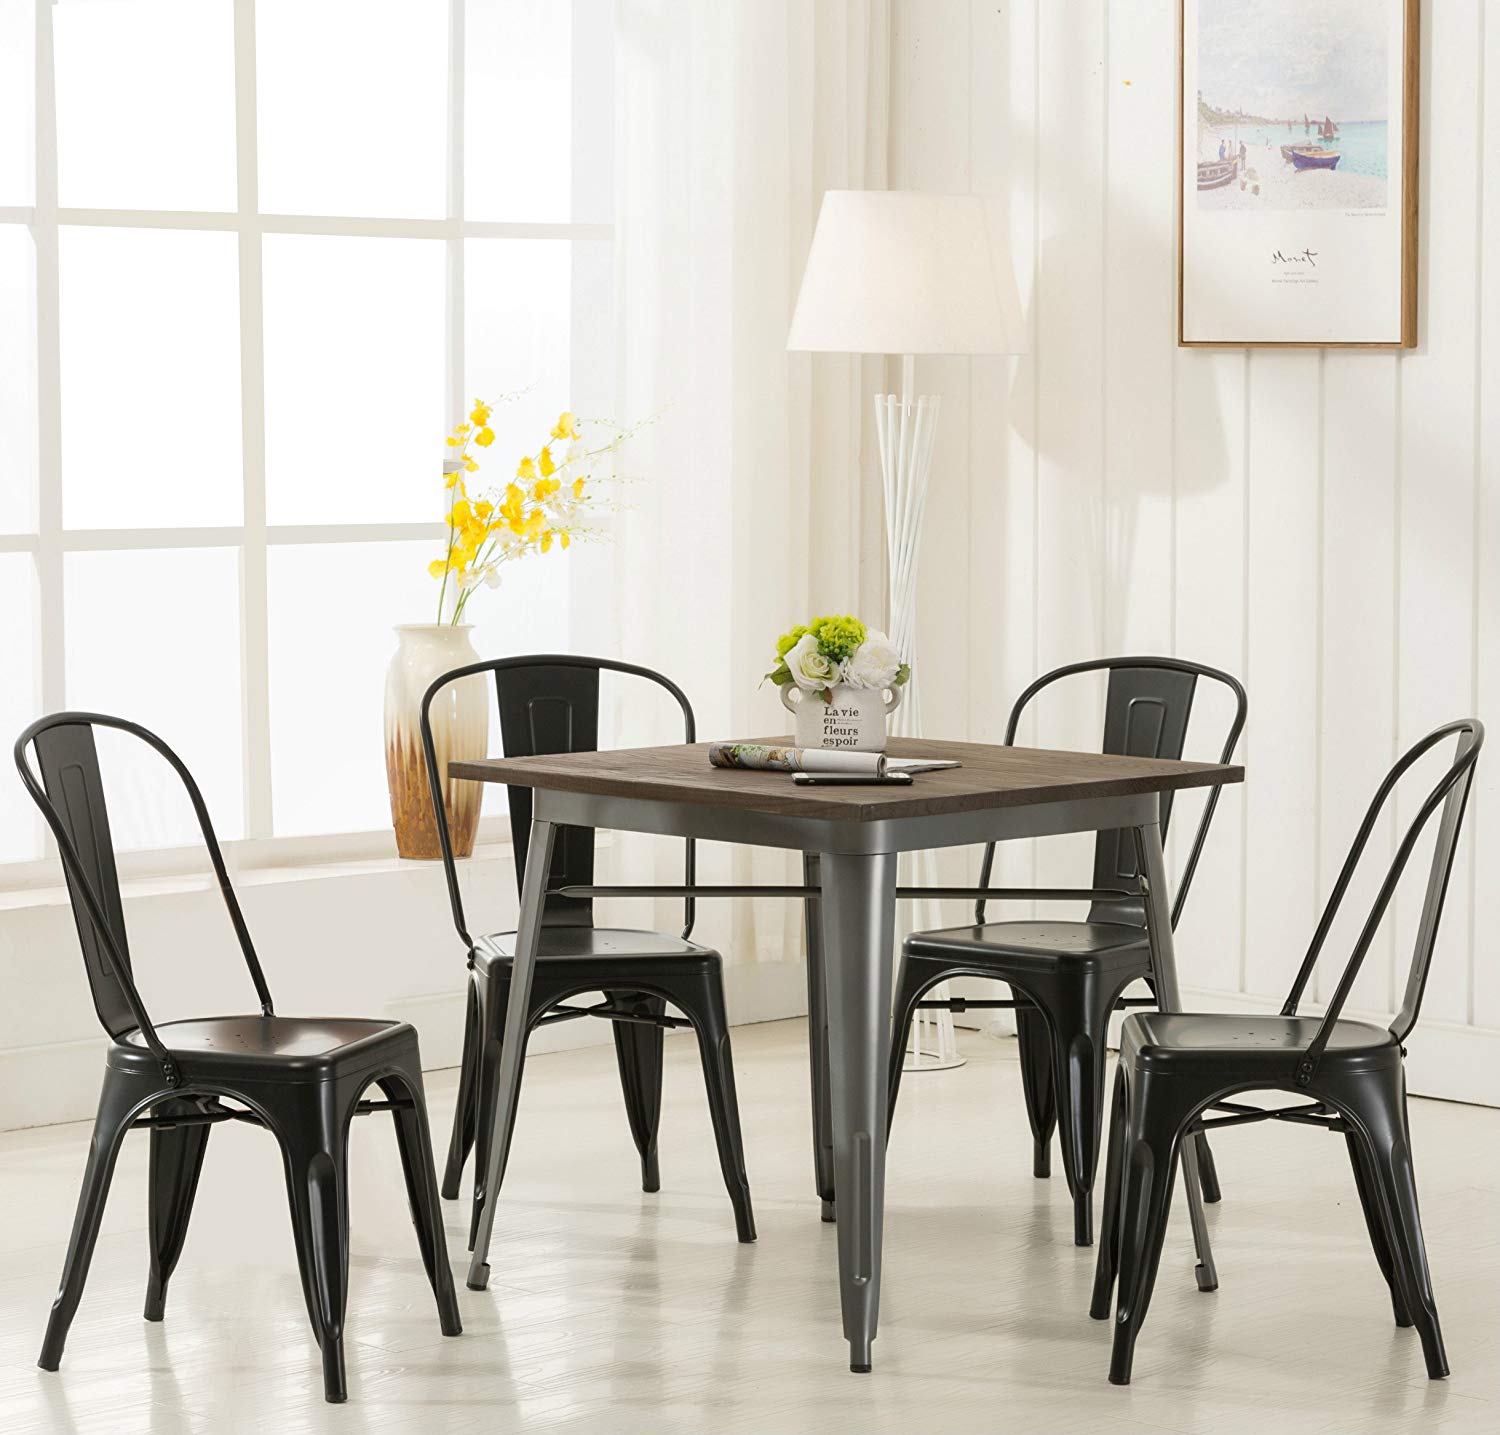 5 Best Industrial Kitchen Table and Chairs Set with Reviews